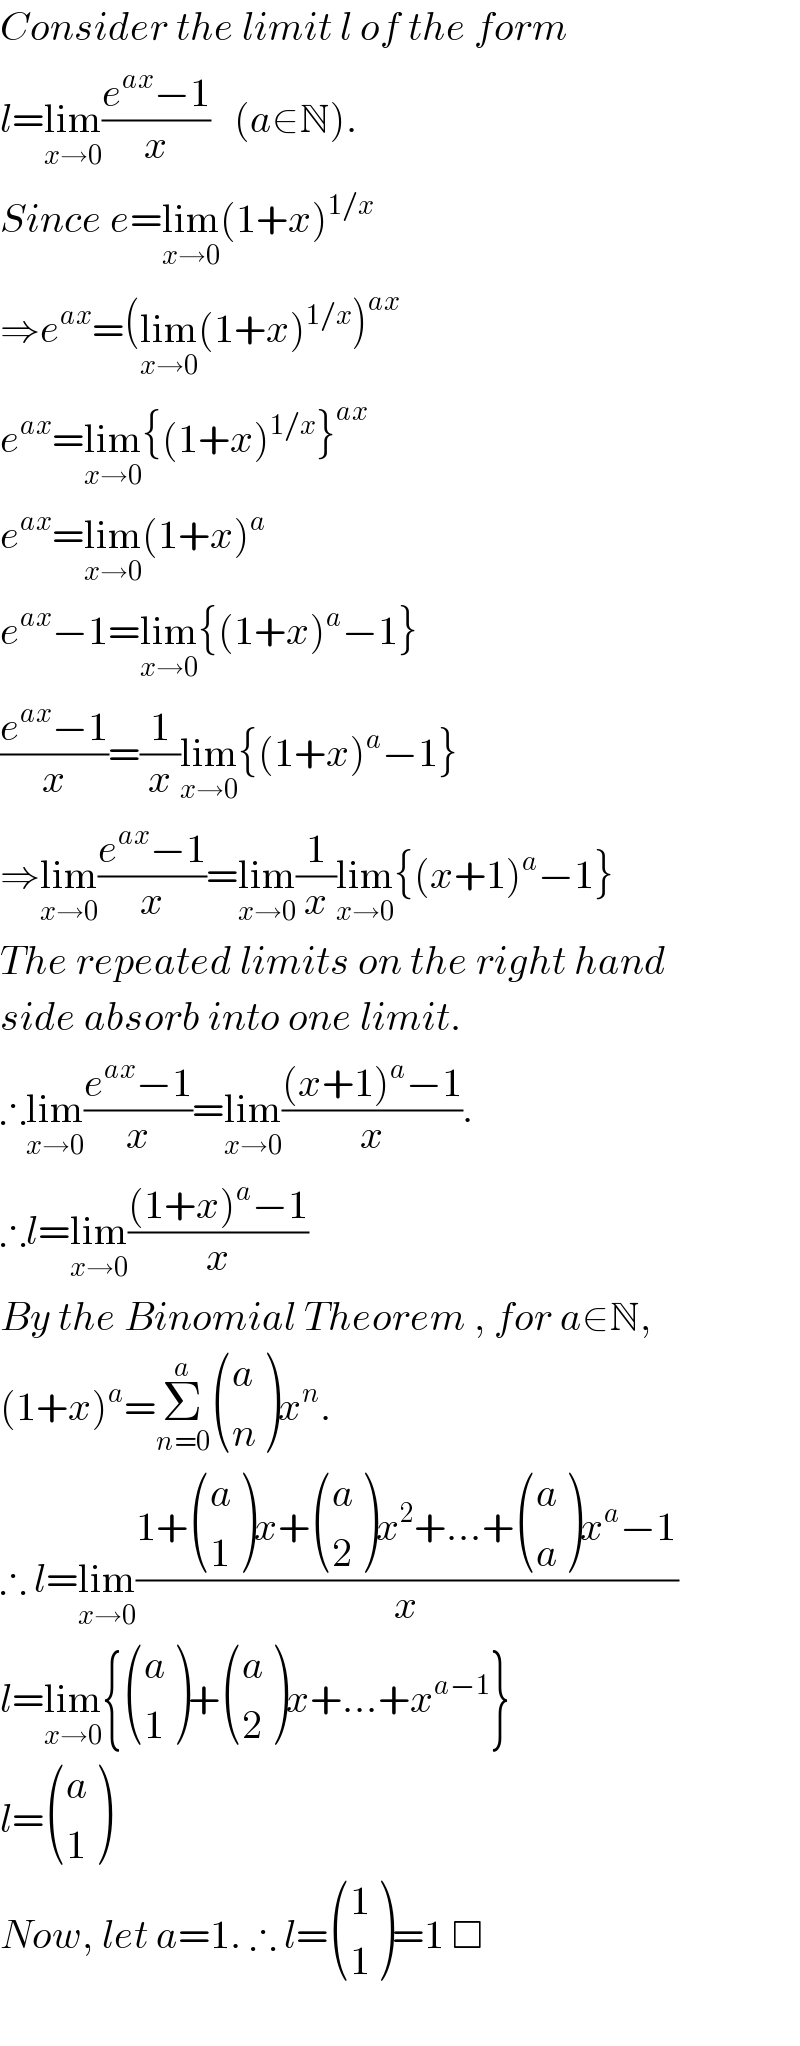 Consider the limit l of the form  l=lim_(x→0) ((e^(ax) −1)/x)   (a∈N).  Since e=lim_(x→0) (1+x)^(1/x)   ⇒e^(ax) =(lim_(x→0) (1+x)^(1/x) )^(ax)   e^(ax) =lim_(x→0) {(1+x)^(1/x) }^(ax)   e^(ax) =lim_(x→0) (1+x)^a   e^(ax) −1=lim_(x→0) {(1+x)^a −1}  ((e^(ax) −1)/x)=(1/x)lim_(x→0) {(1+x)^a −1}  ⇒lim_(x→0) ((e^(ax) −1)/x)=lim_(x→0) (1/x)lim_(x→0) {(x+1)^a −1}  The repeated limits on the right hand  side absorb into one limit.  ∴lim_(x→0) ((e^(ax) −1)/x)=lim_(x→0) (((x+1)^a −1)/x).  ∴l=lim_(x→0) (((1+x)^a −1)/x)  By the Binomial Theorem , for a∈N,  (1+x)^a =Σ_(n=0) ^a  ((a),(n) )x^n .  ∴ l=lim_(x→0) ((1+ ((a),(1) )x+ ((a),(2) )x^2 +...+ ((a),(a) )x^a −1)/x)  l=lim_(x→0) { ((a),(1) )+ ((a),(2) )x+...+x^(a−1) }  l= ((a),(1) )  Now, let a=1. ∴ l= ((1),(1) )=1 □    